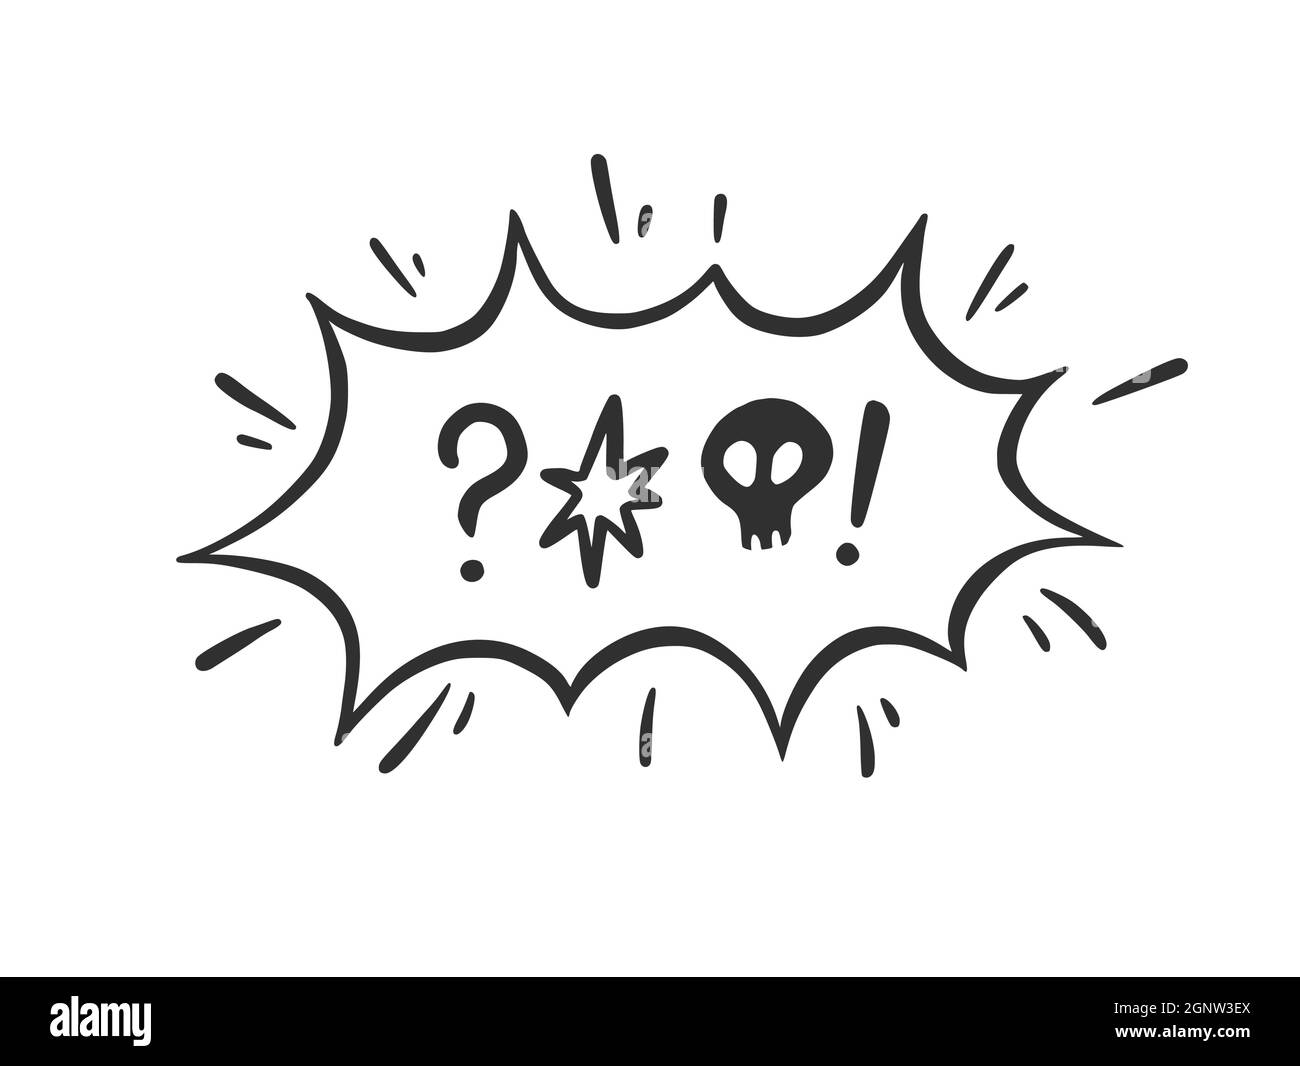 Swear word speech bubble. Curse, rude, swear word for angry, bad, negative expression. Hand drawn doodle sketch style. Vector illustration isolated on white background. Stock Vector